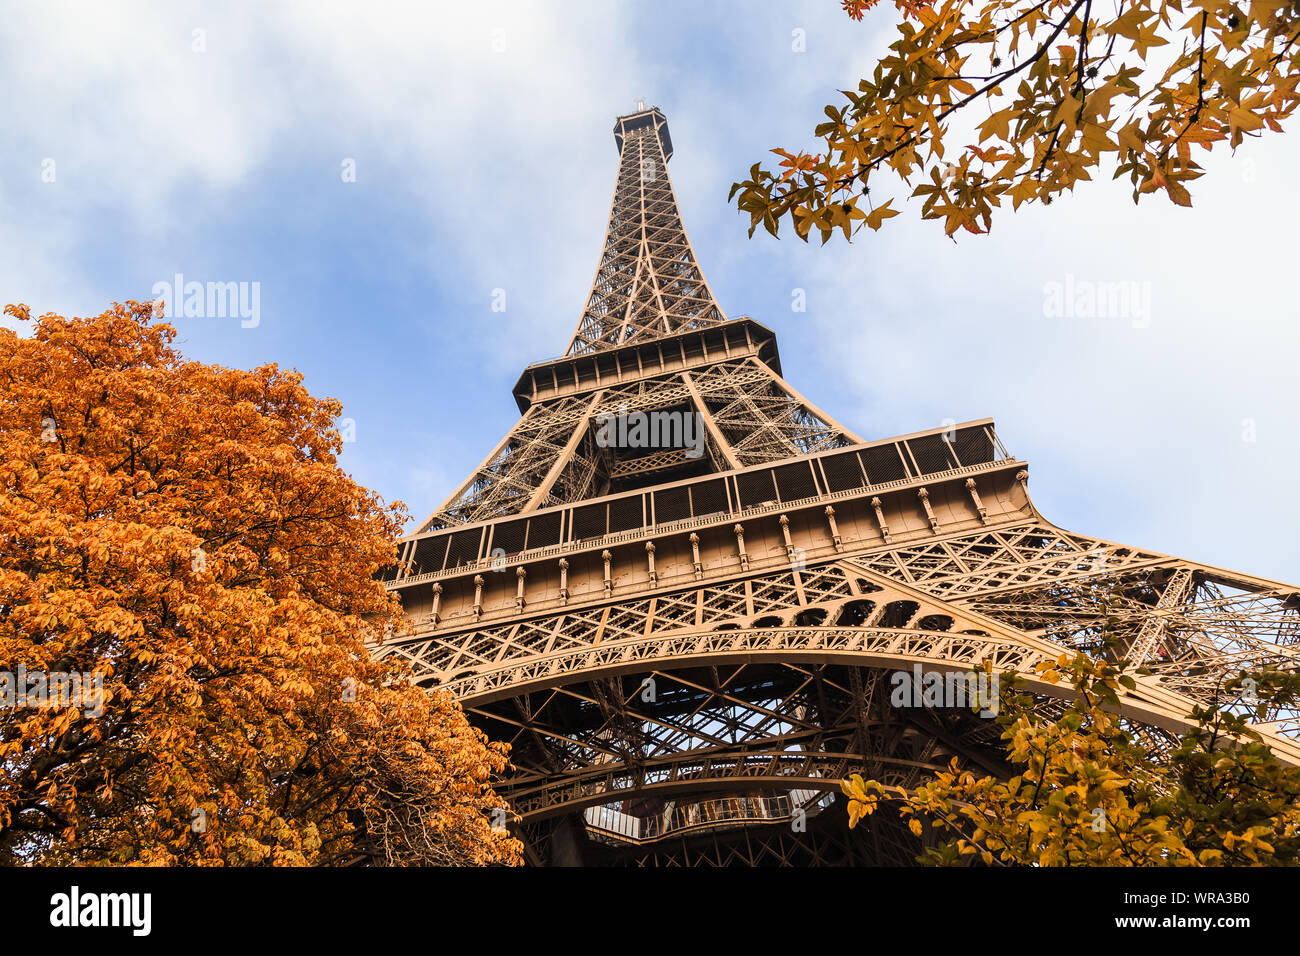 Low-angle shot of the Eiffel tower in Paris France on an autumn day surrounded by brown leaves of trees, tour Eiffel in the fall Stock Photo